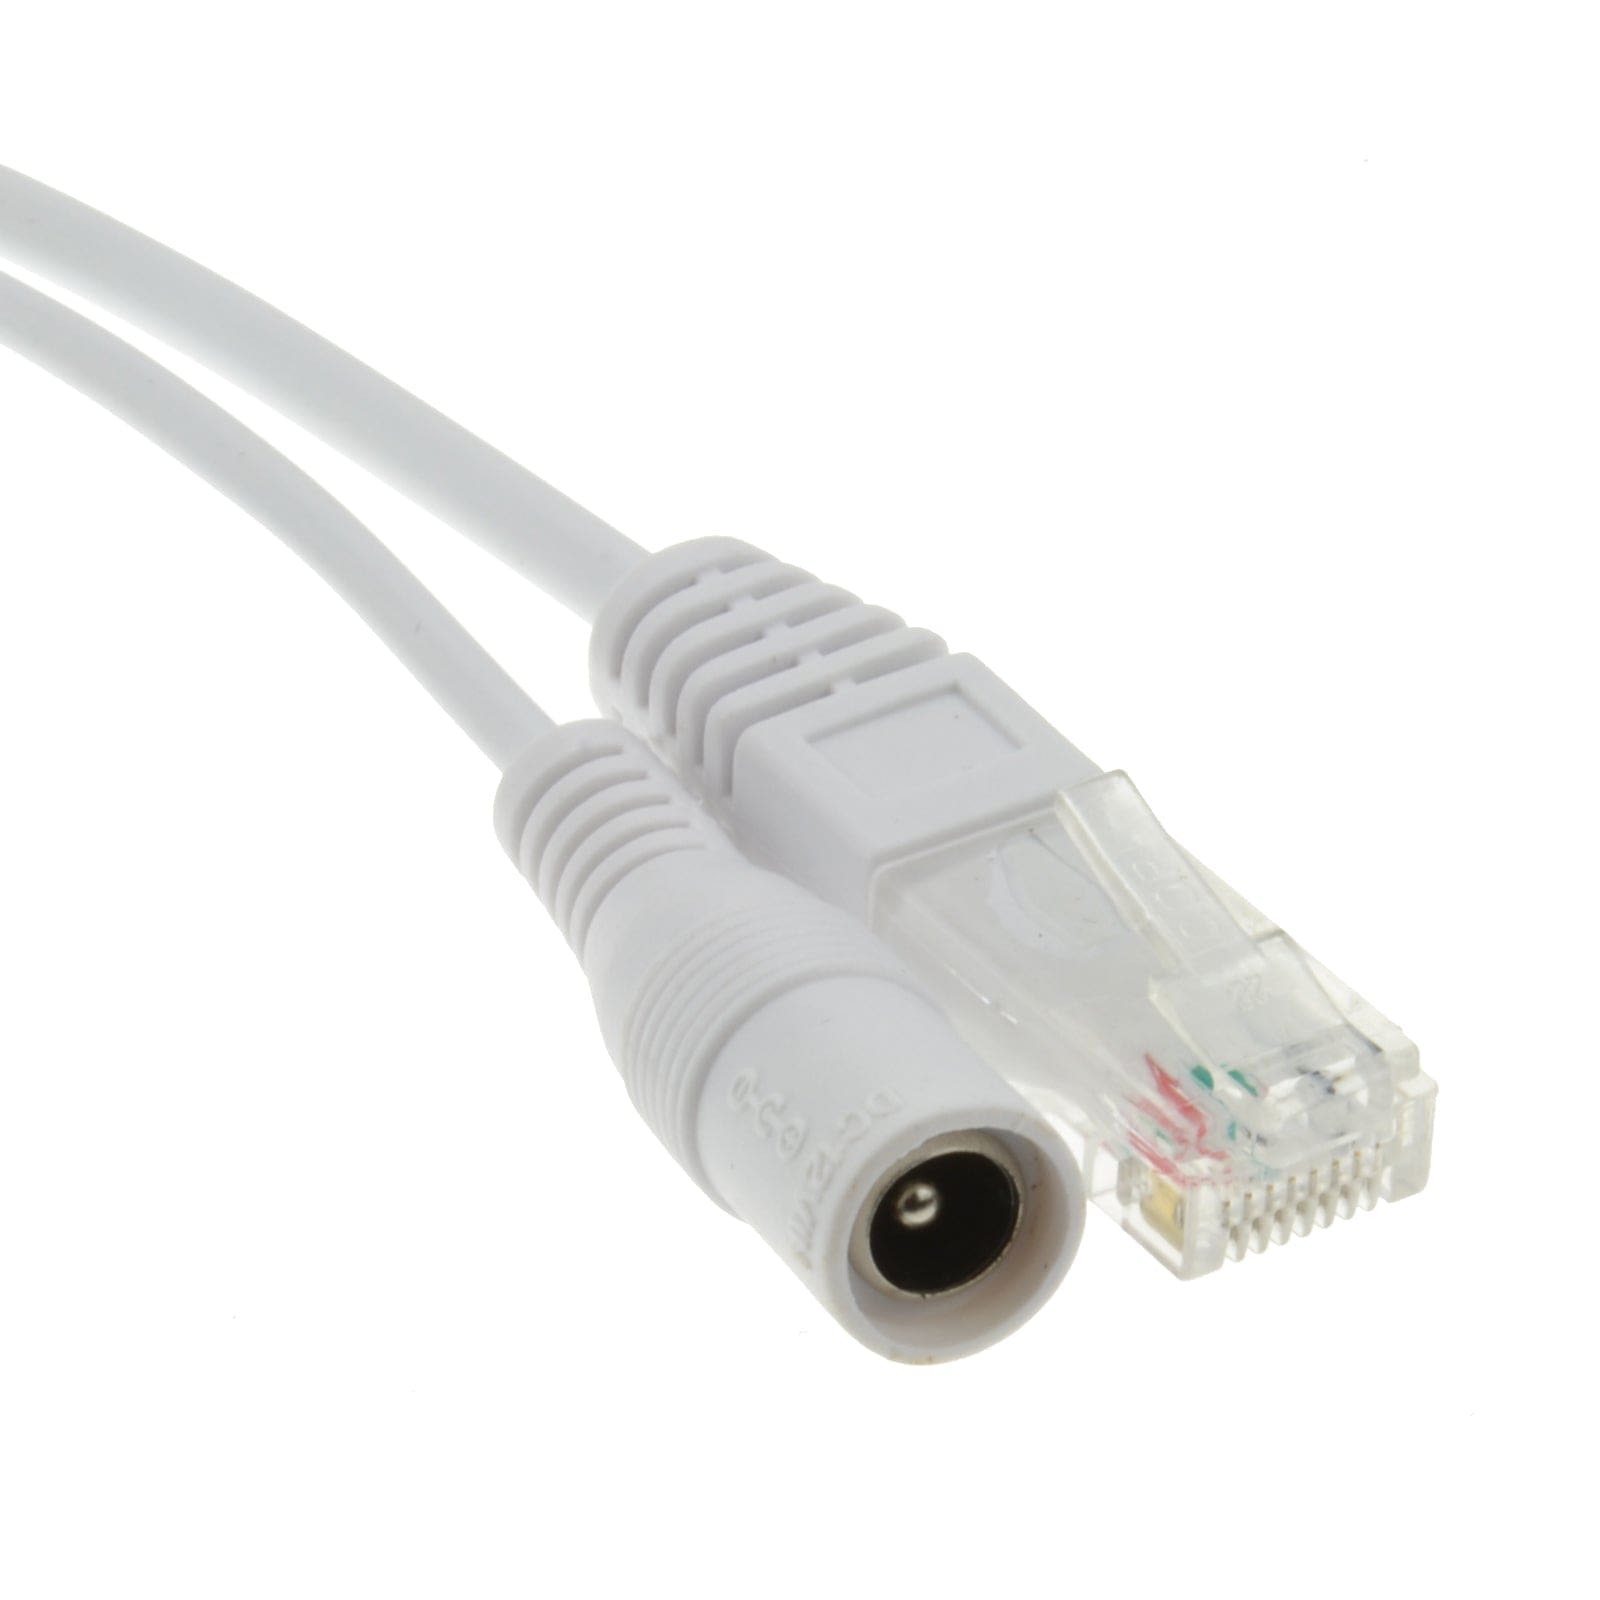 Power Over Ethernet (PoE) Injector/Extractor Cables - The Pi Hut